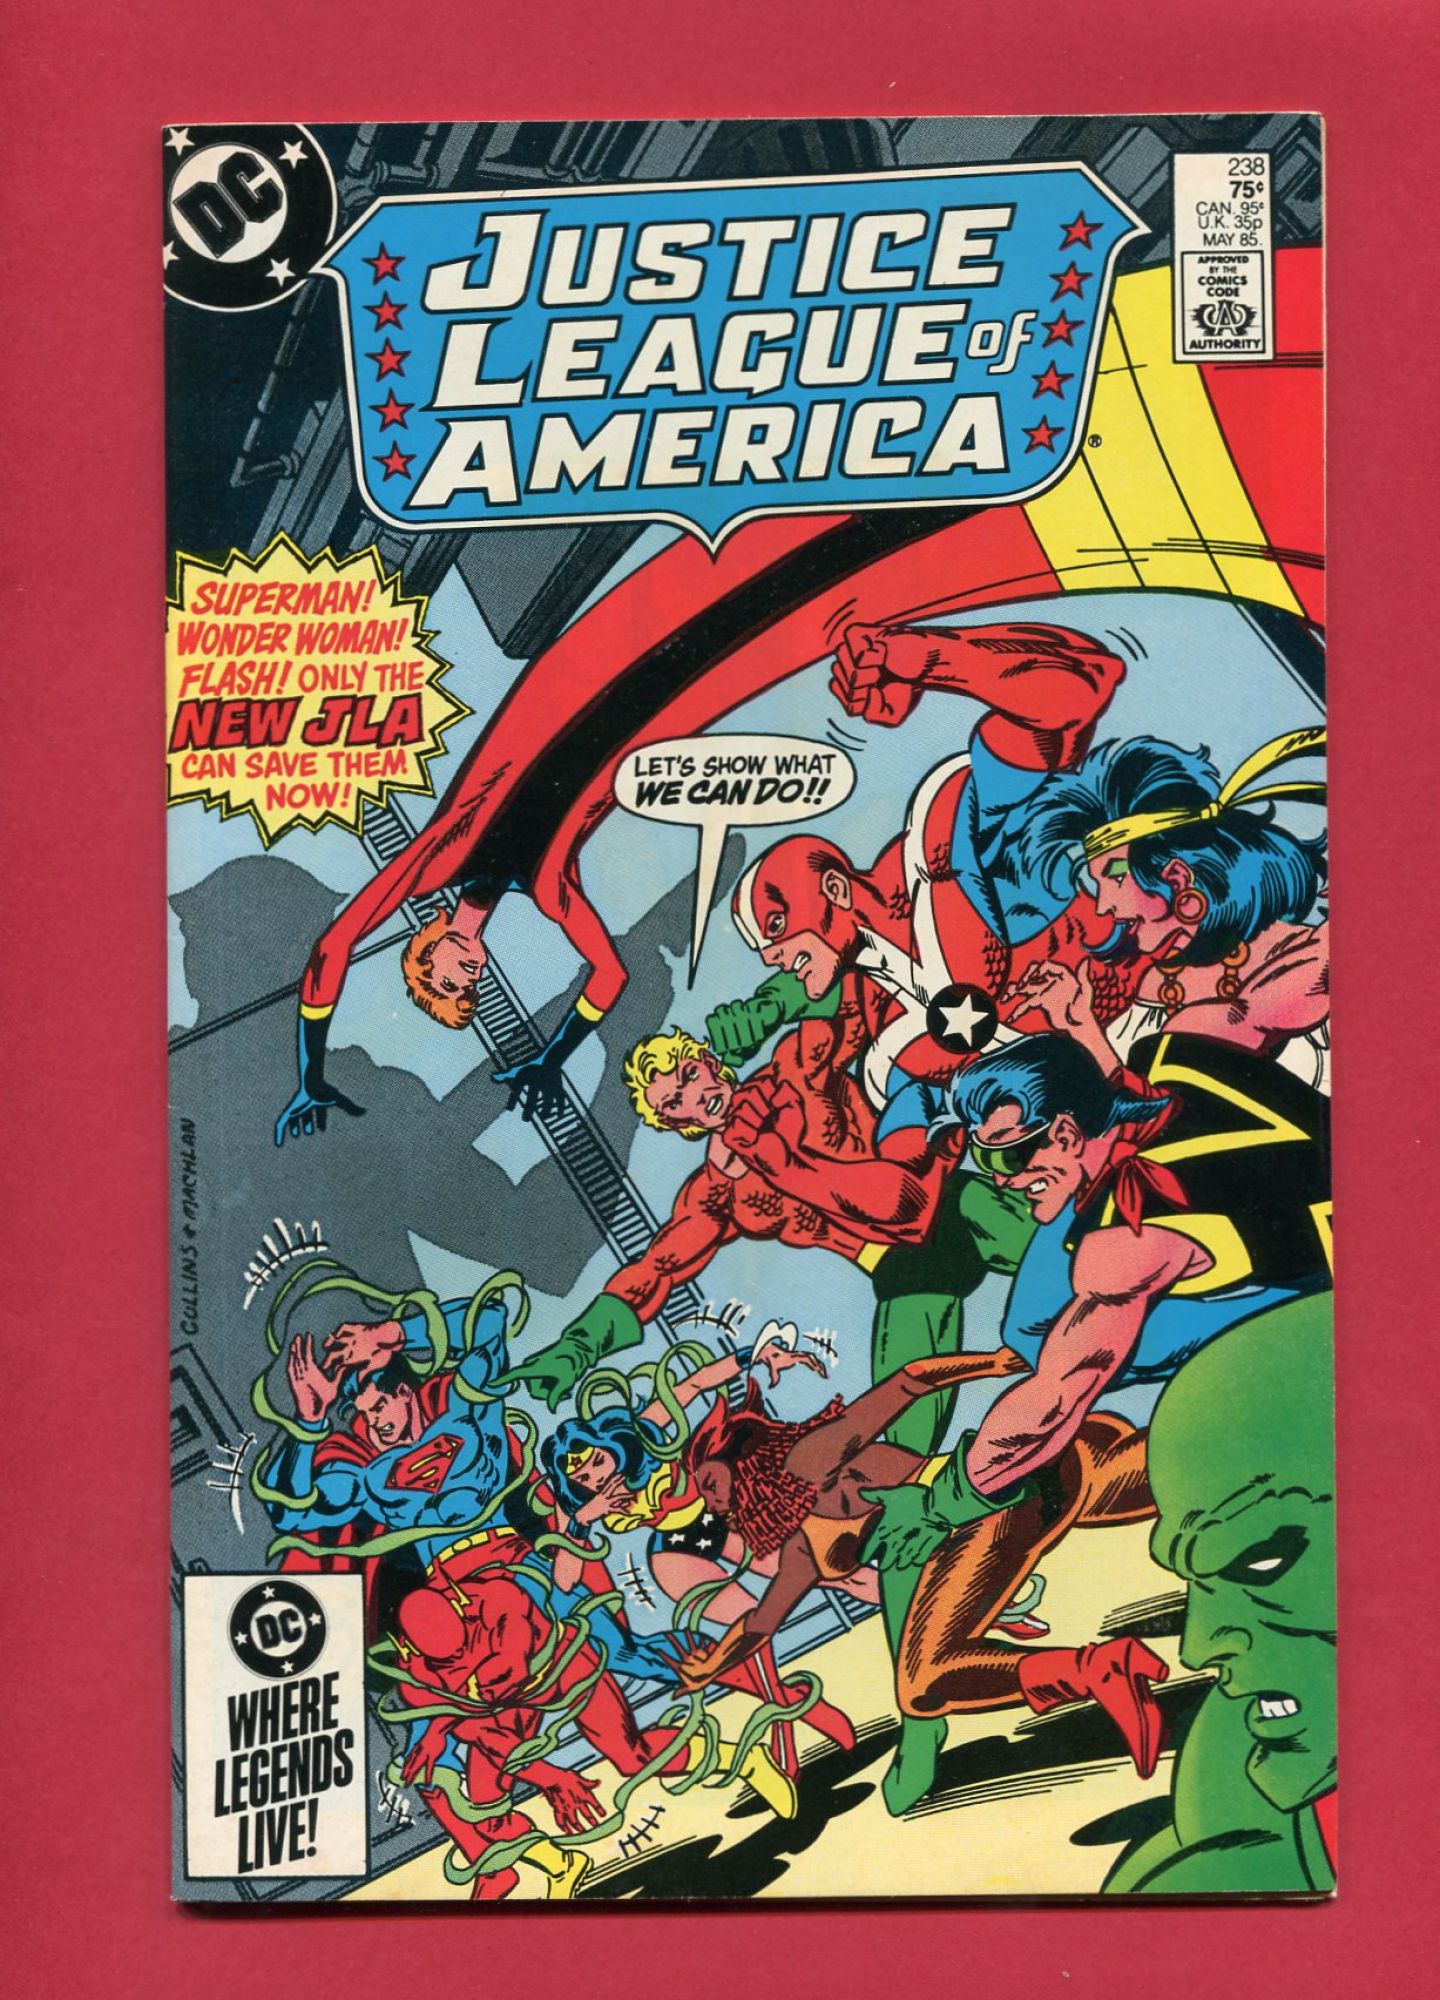 Justice League of America (Volume 1 1960) #238, May 1985, 8.0 VF